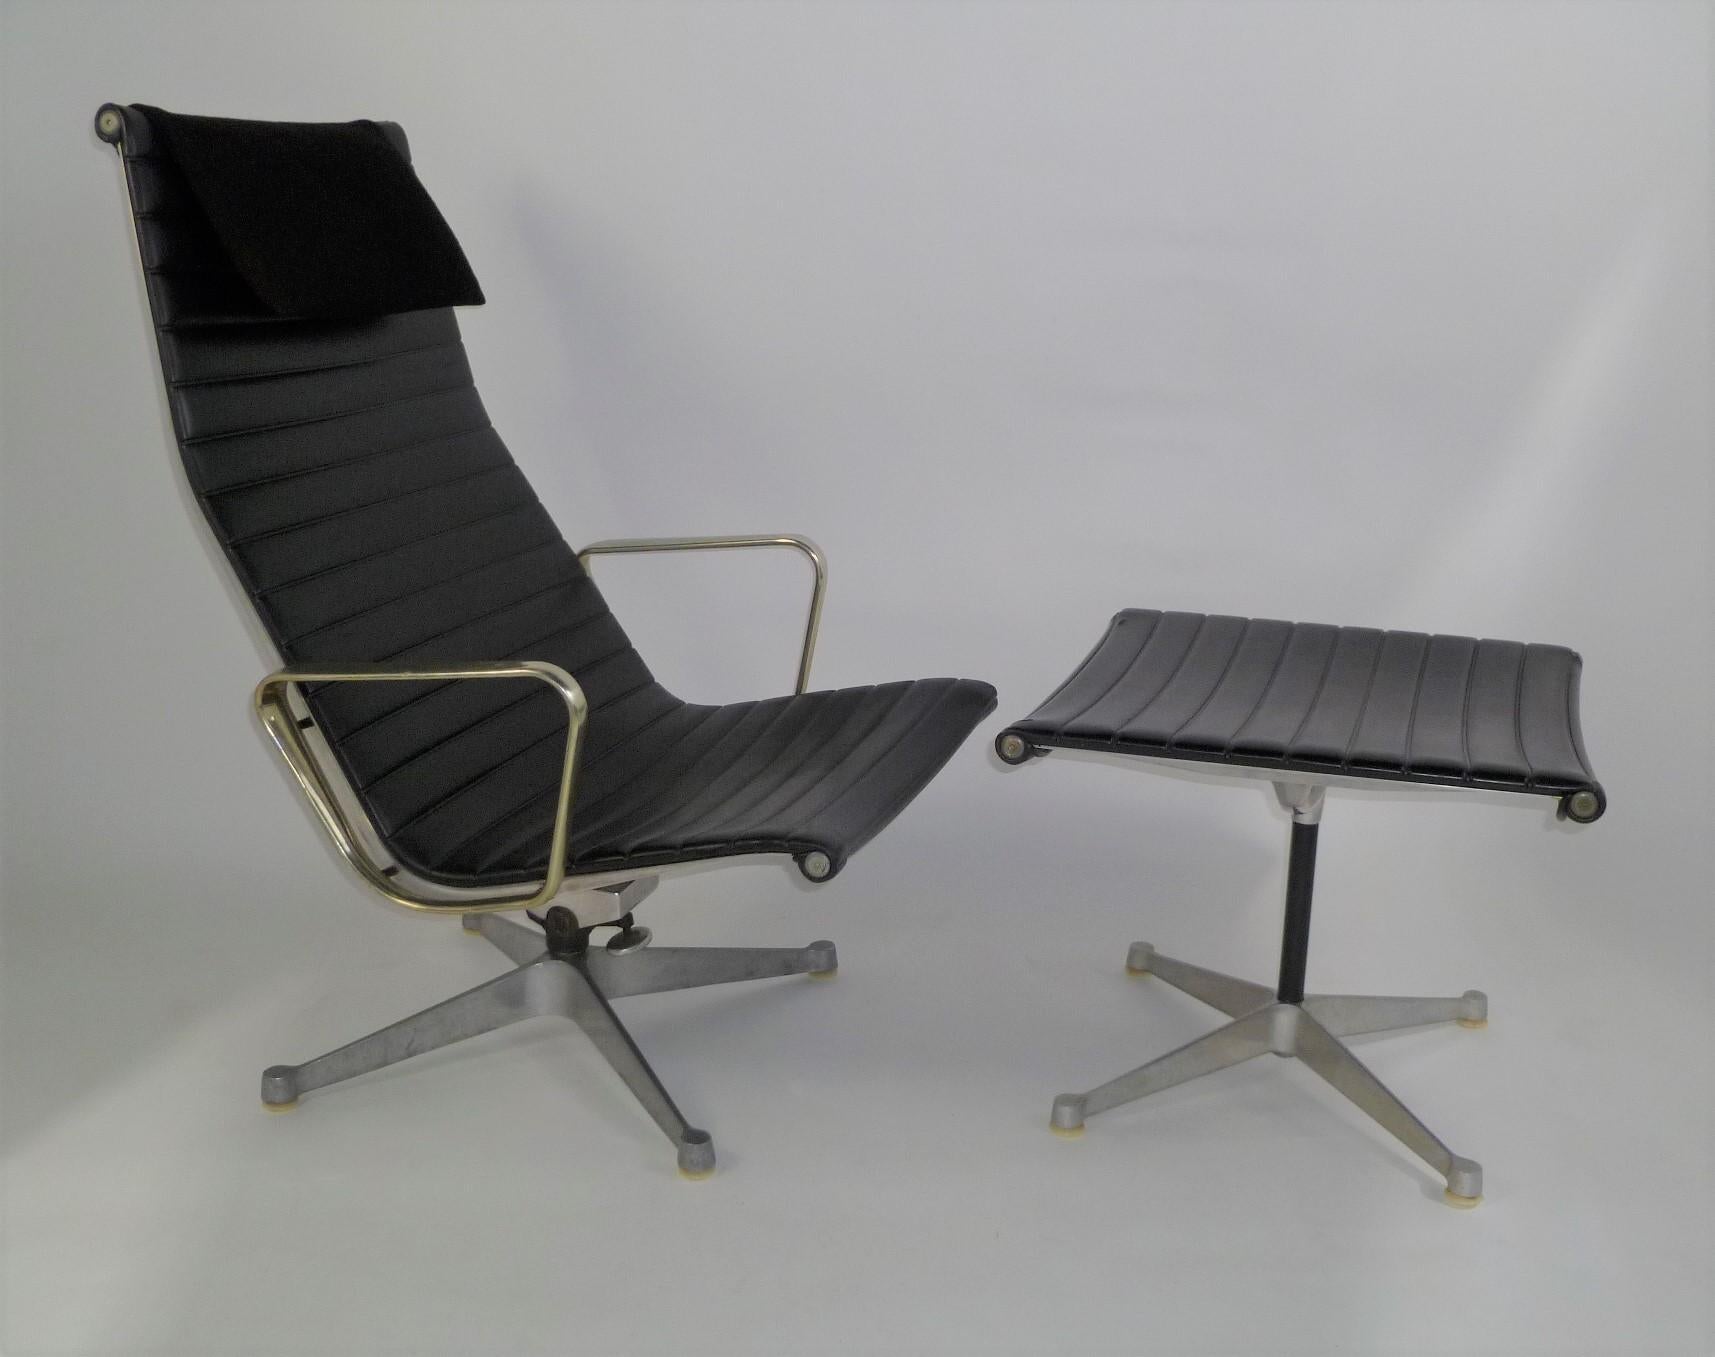 This early 1960s Charles and Ray Eames Aluminum Group lounge chair has a high back, relaxed pitch, and padded headrest pillow covered in hopsack, a balancing tilt and swivel. Its clean, graceful lines highlighted this Eames classic and was first